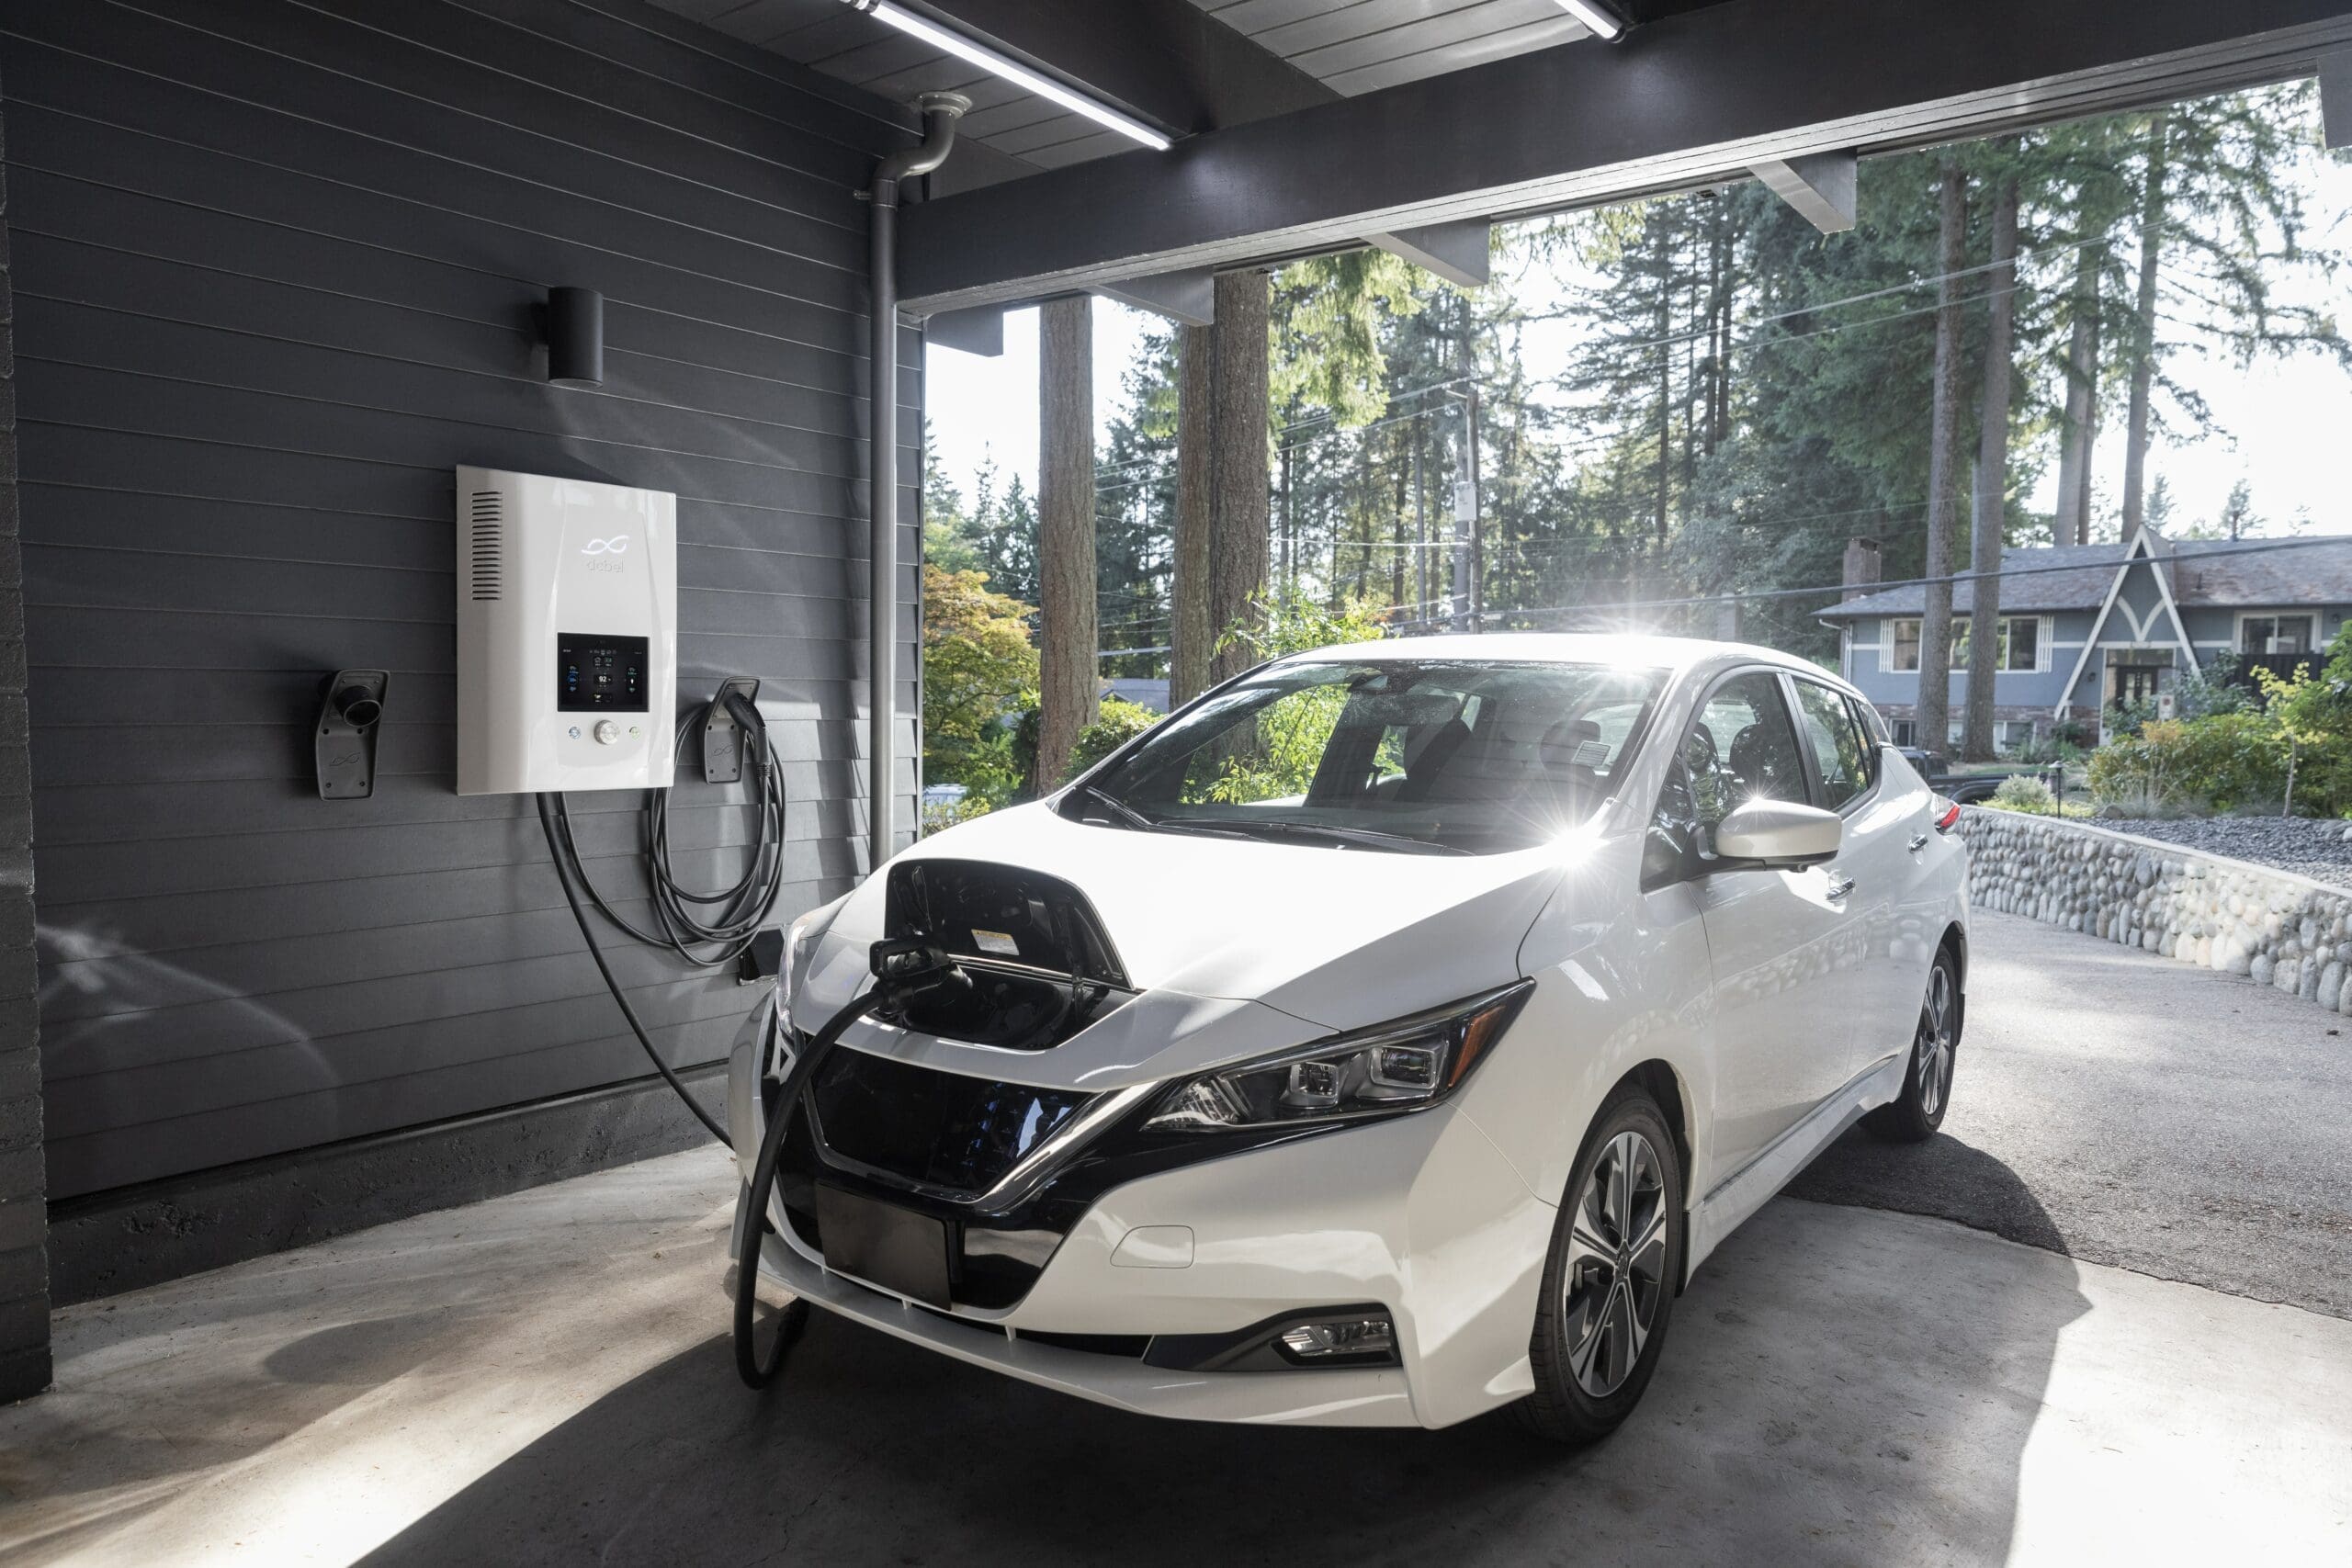 Featured image for “Bill on EV chargers in new homes passes Senate committee”